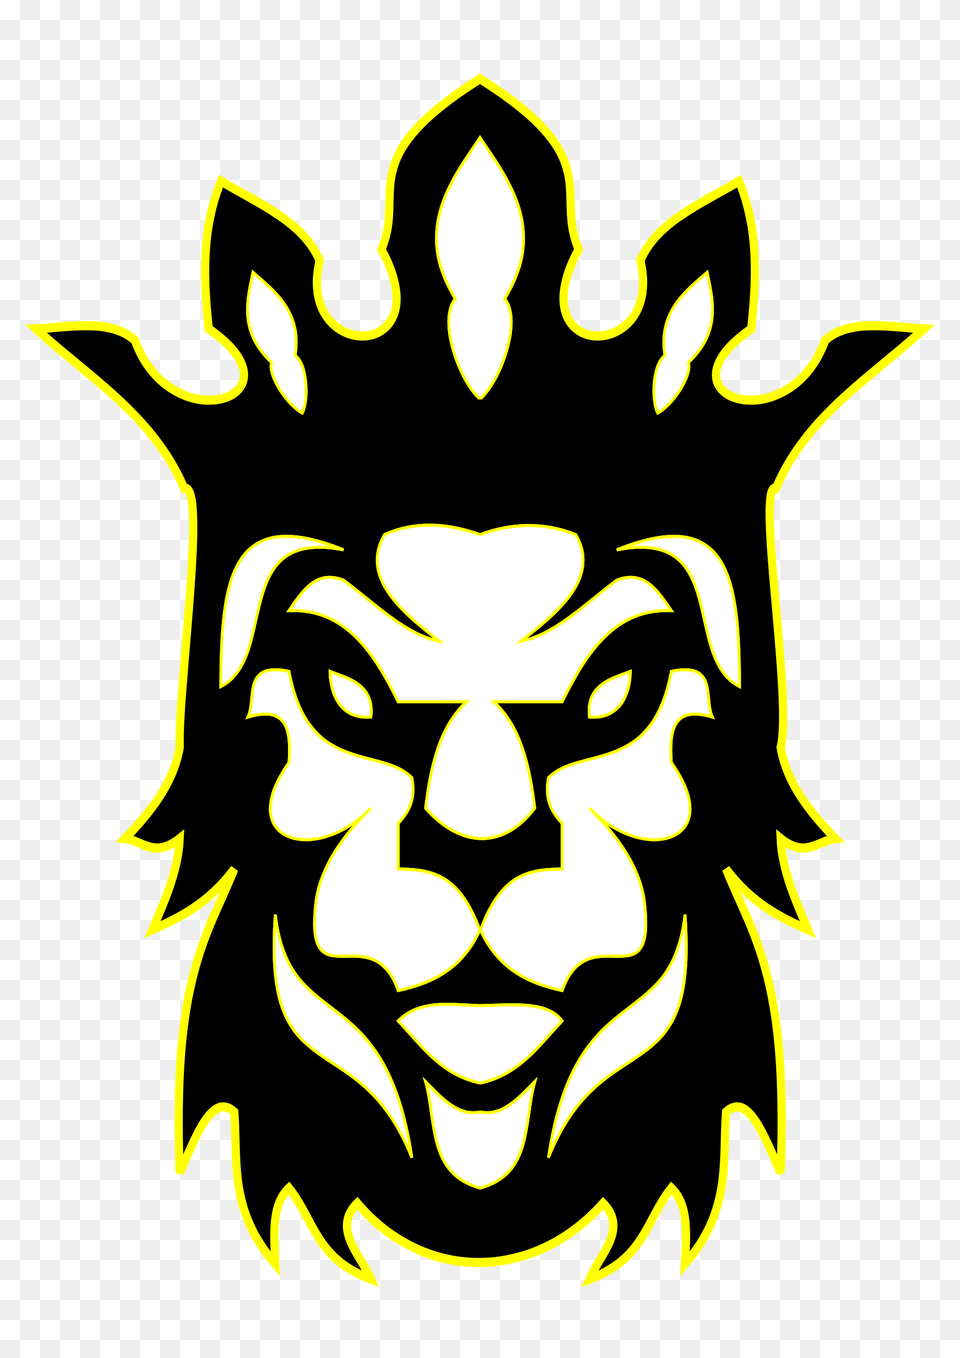 The Lion As A King Icons, Stencil, Symbol, Emblem, Baby Png Image